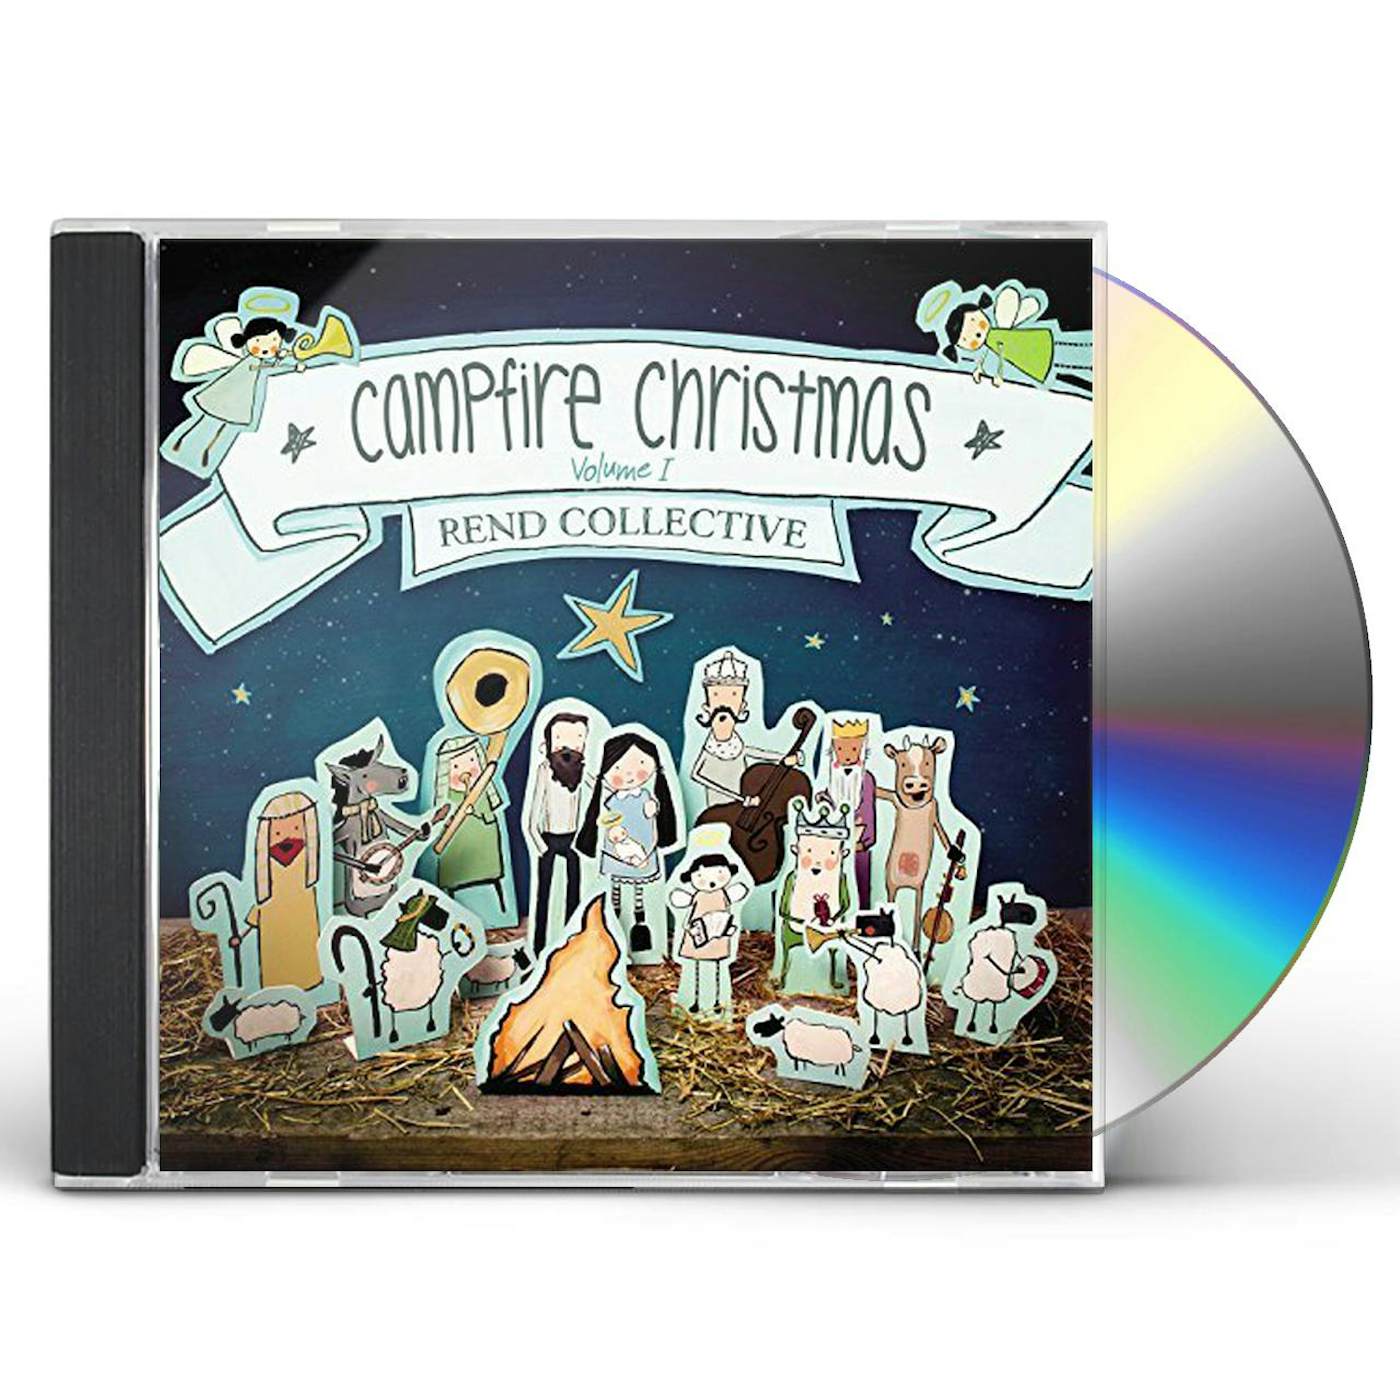 Rend Collective CAMPFIRE CHRISTMAS 1 CD